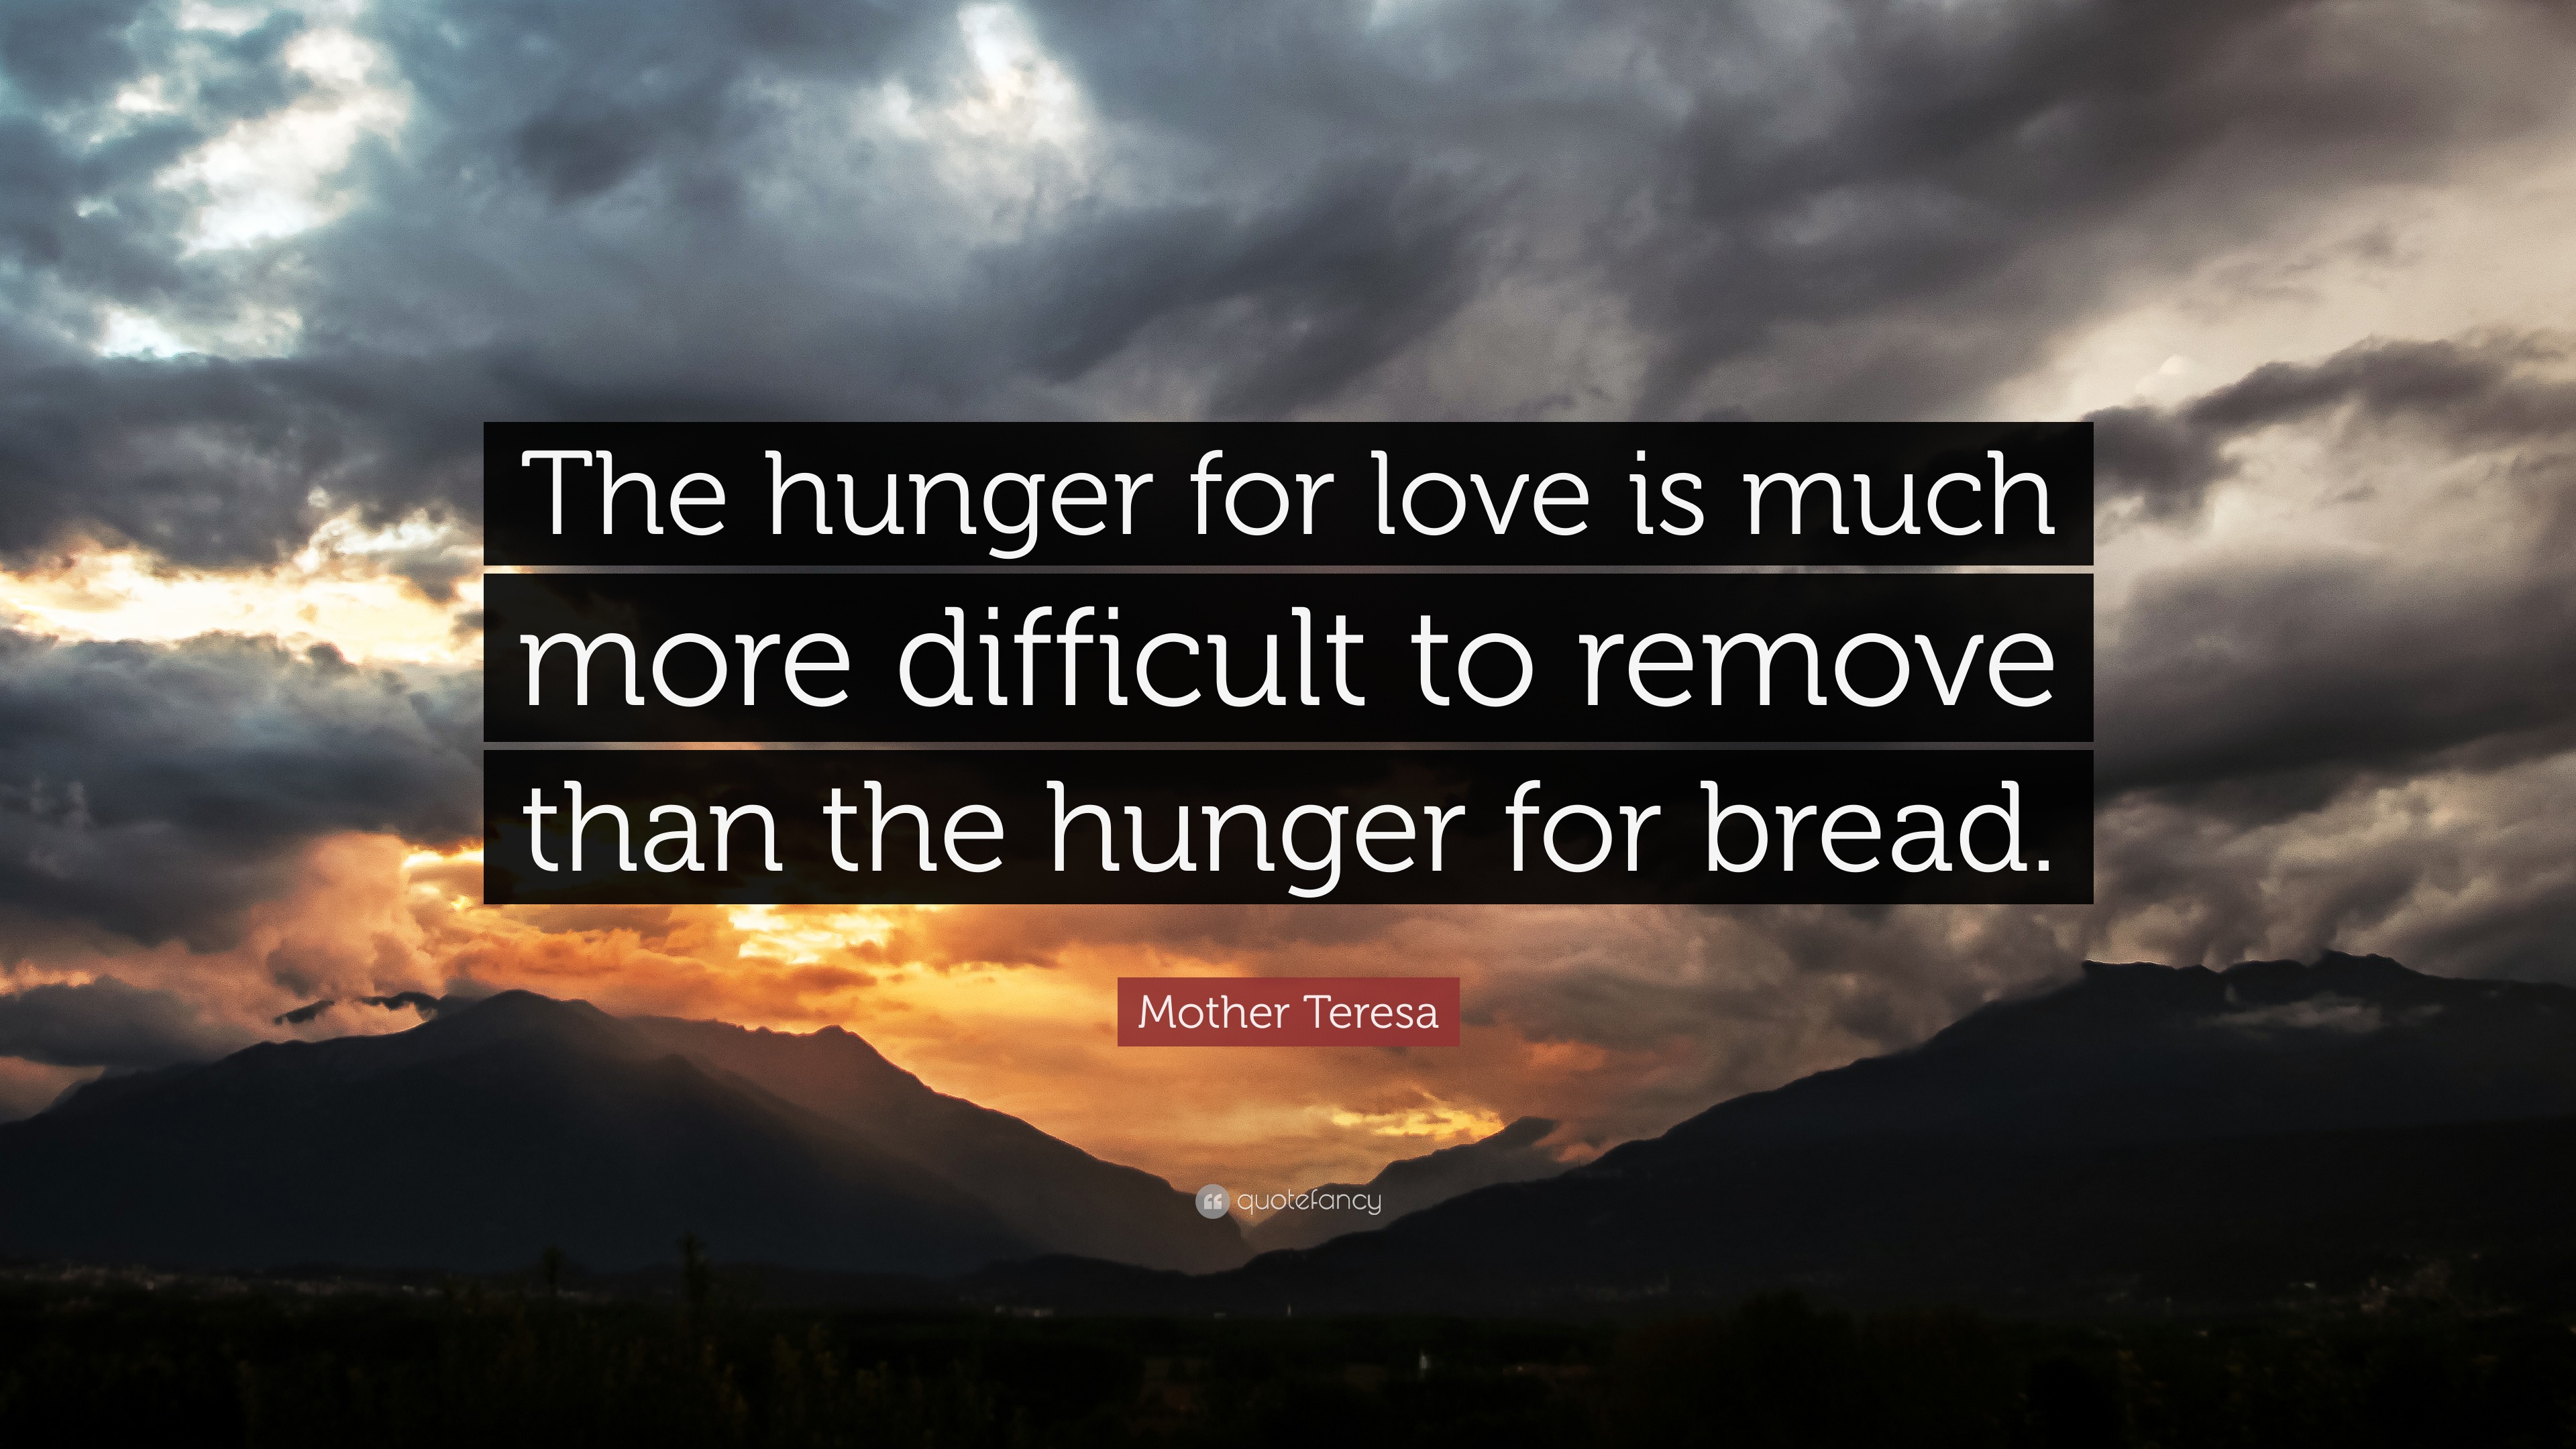 Mother Teresa Quote The Hunger For Love Is Much More Difficult To Remove Than The Hunger For